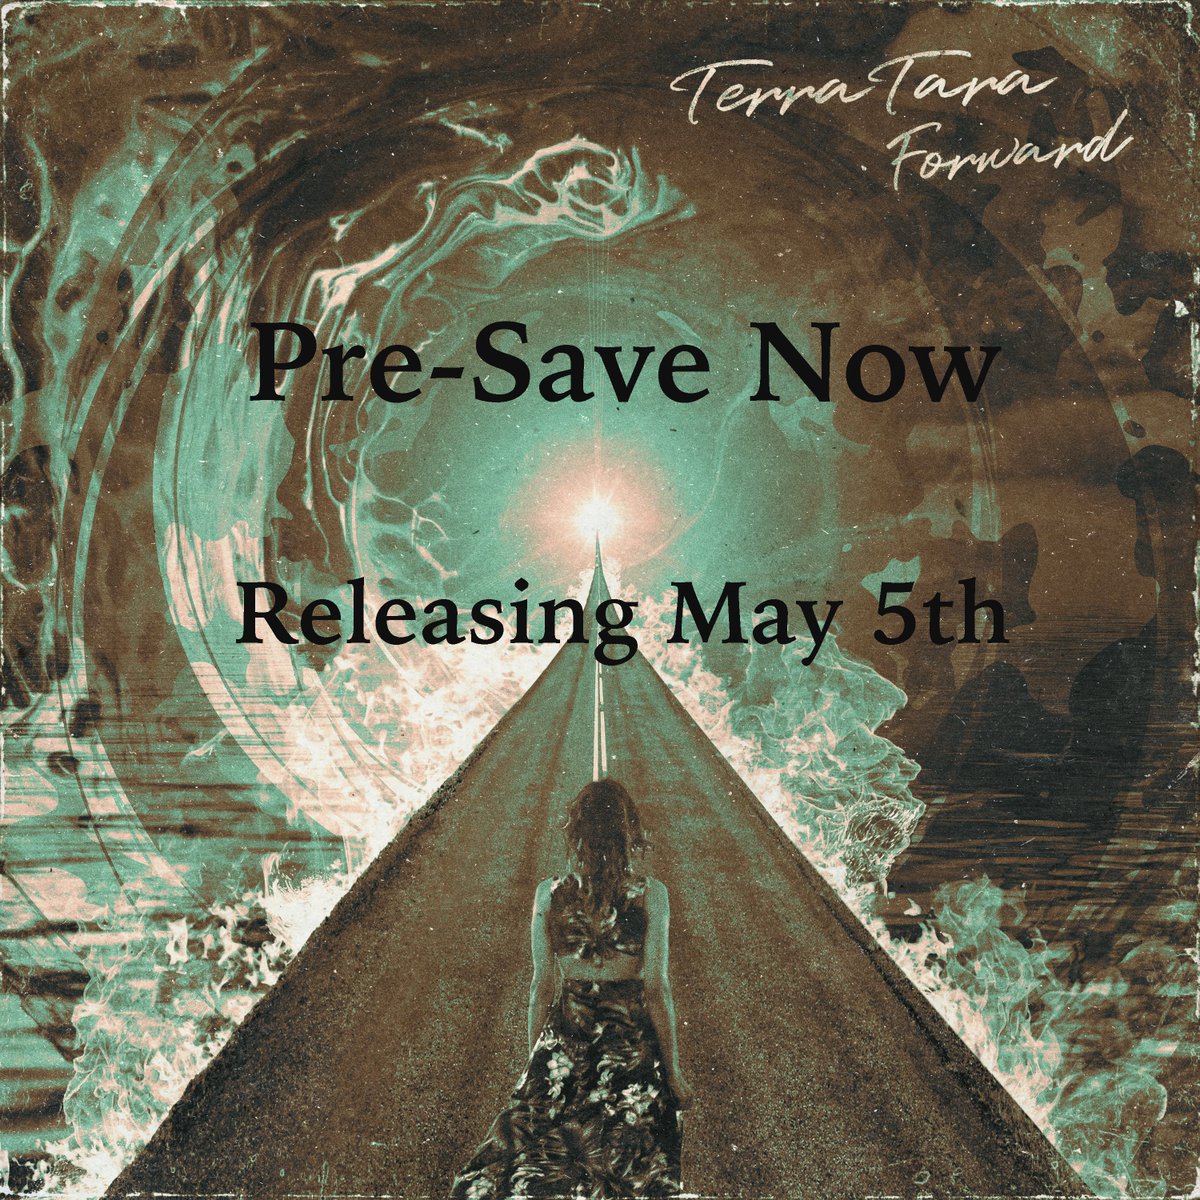 Hey my peeps! 'FORWARD' releases May 5th! If you have Spotify, you can pre-save it by clicking the link below! show.co/WKdxj3E